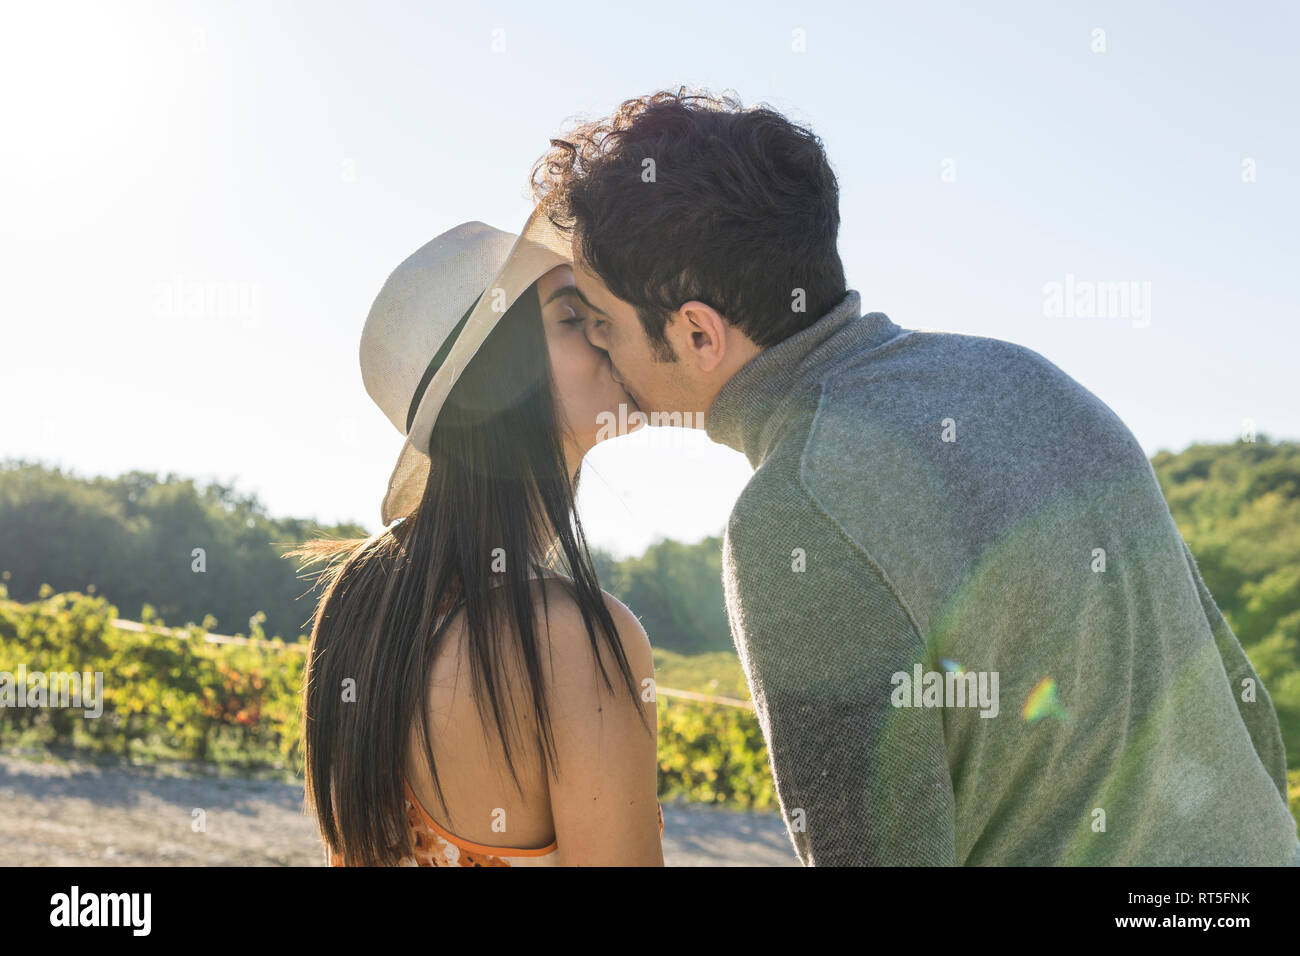 Italy, Tuscany, Siena, young couple kissing in a vineyard Stock Photo